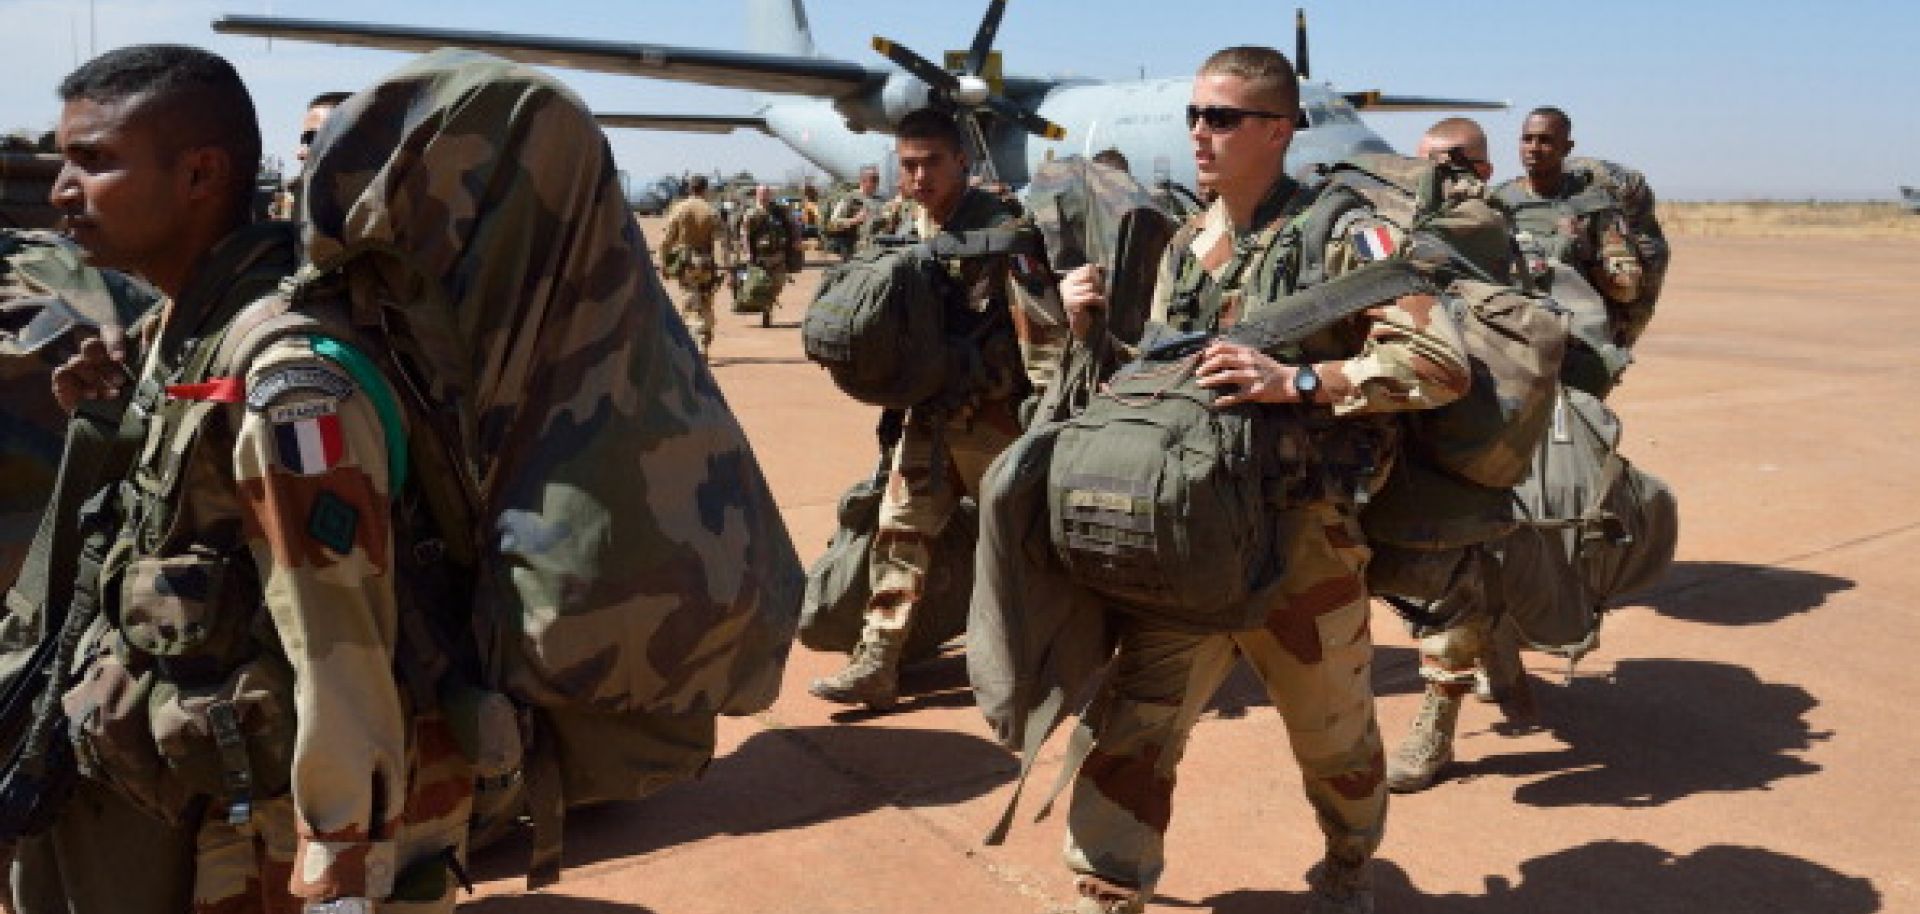 The French and Jihadist Objectives in Mali